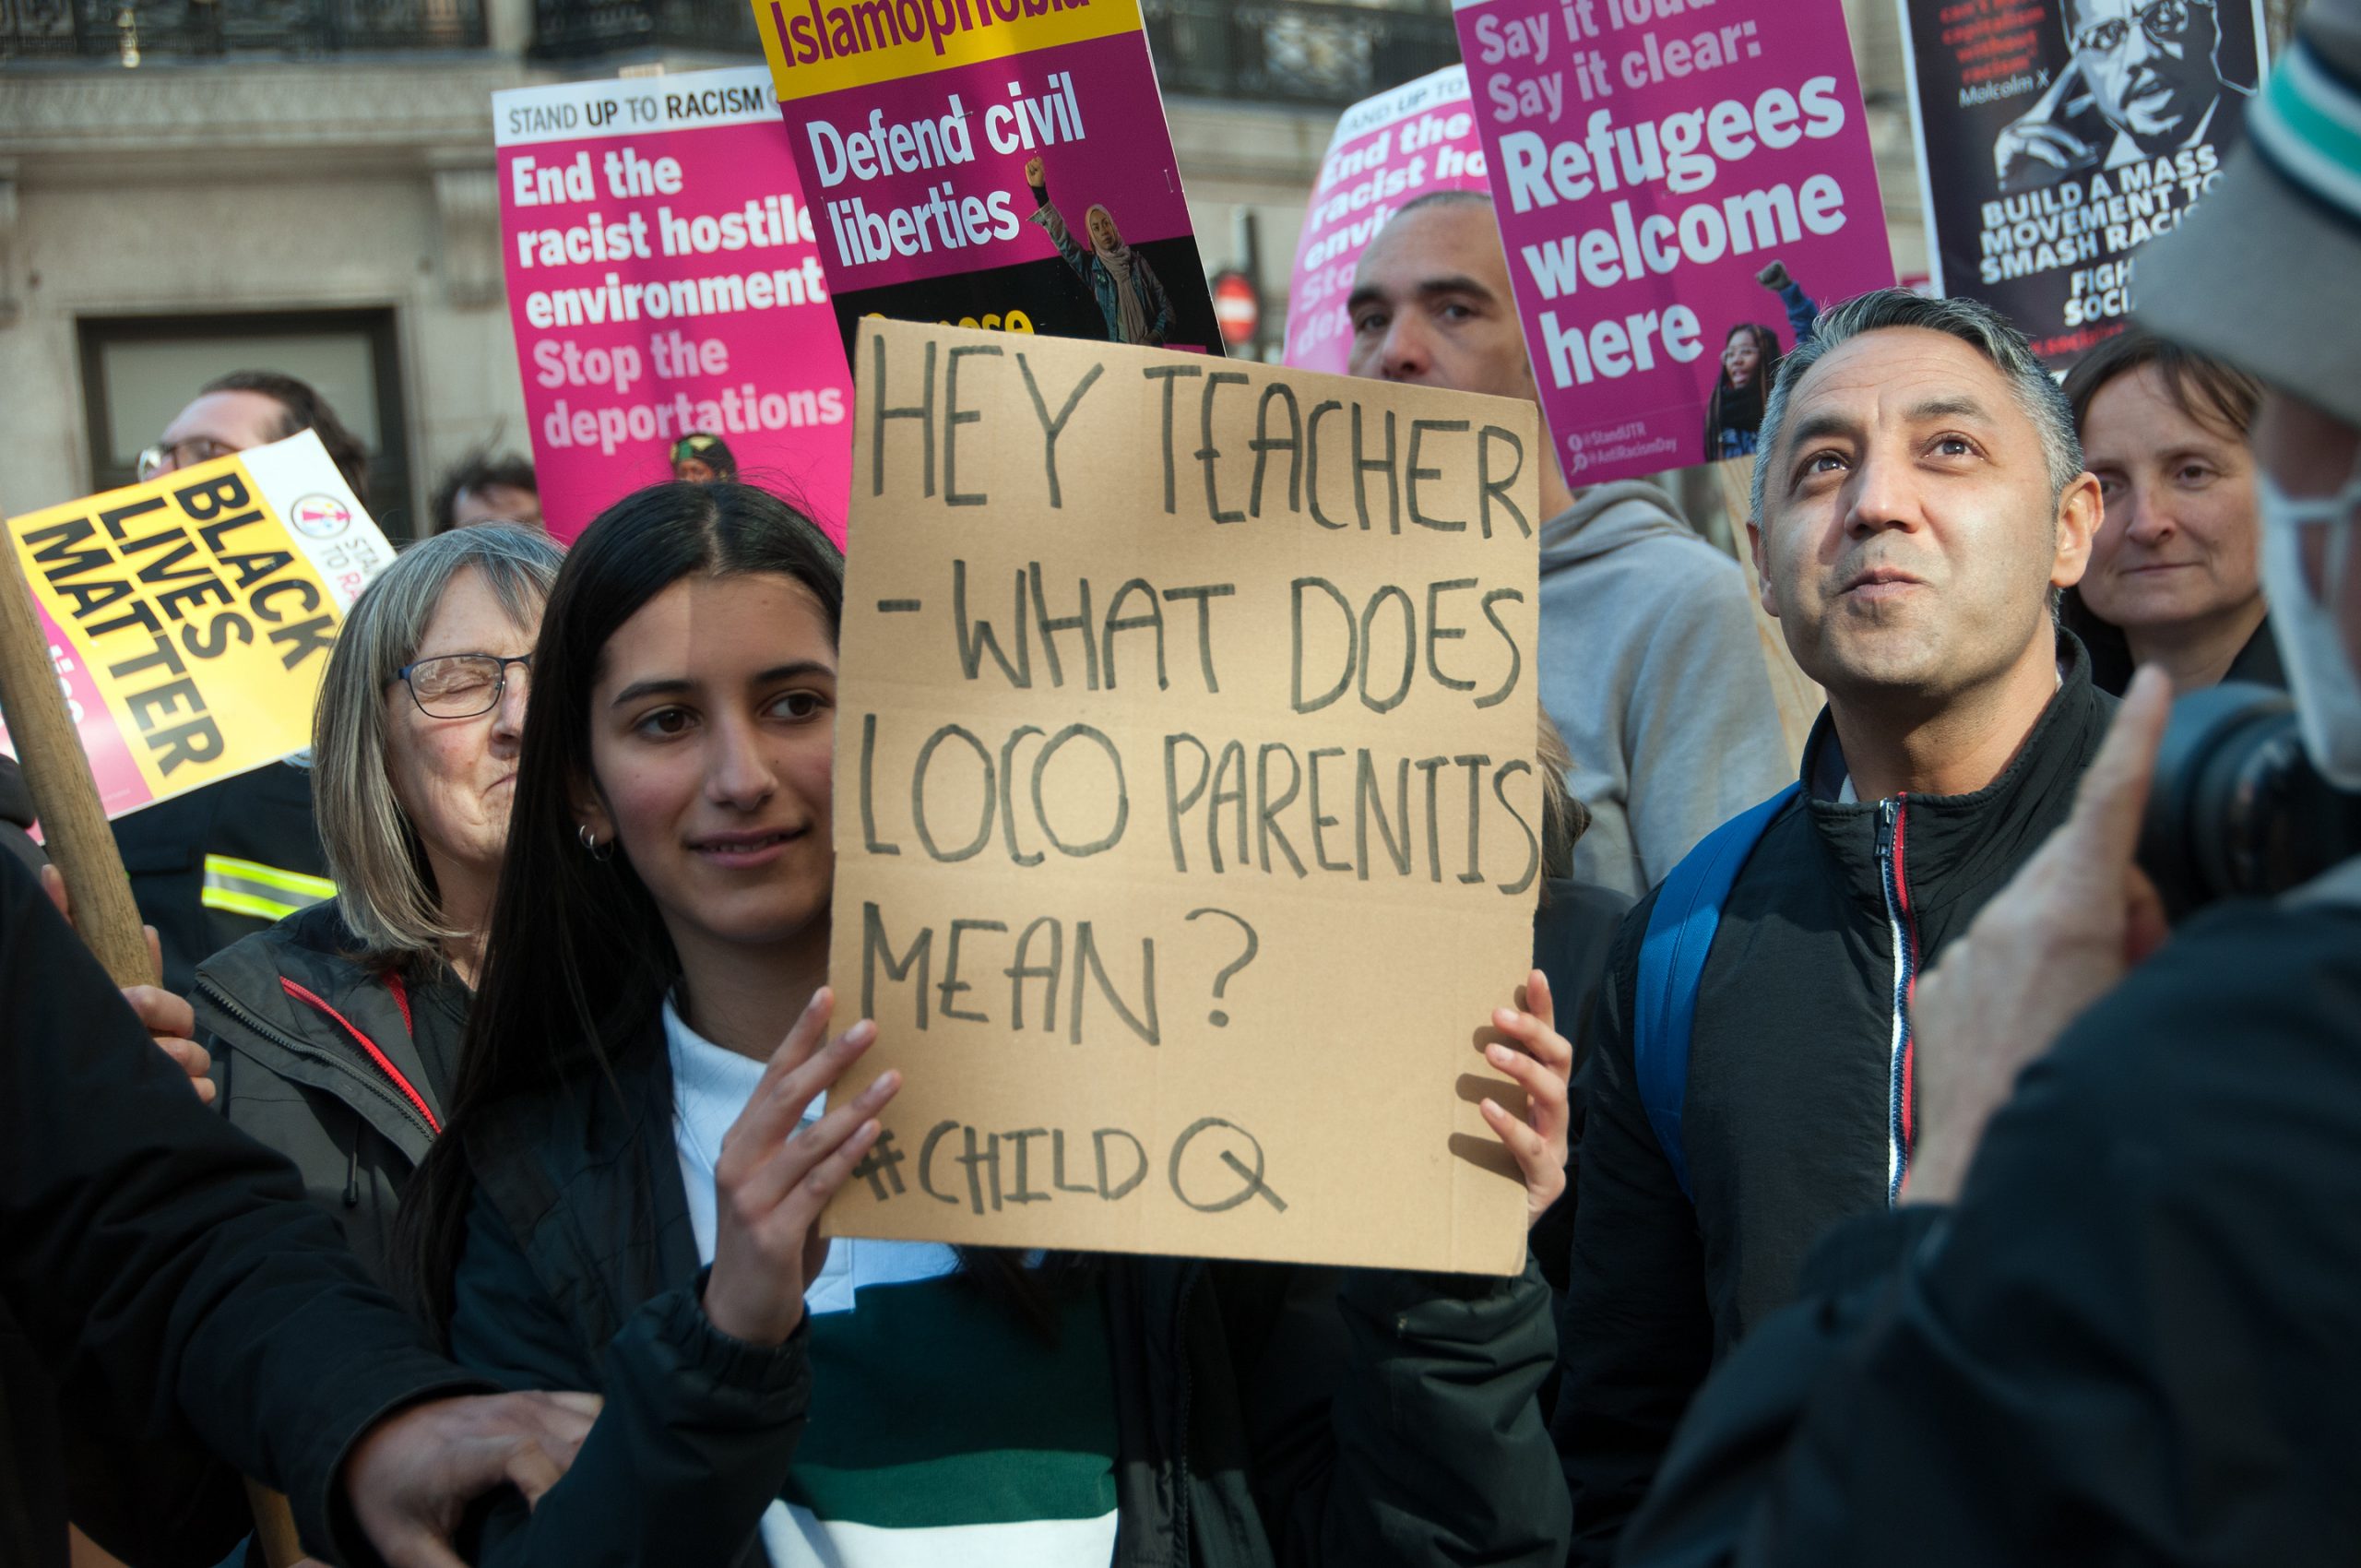 A sign at a protest reads: "Hey Teacher- what does Loco Parentis mean? #ChildQ